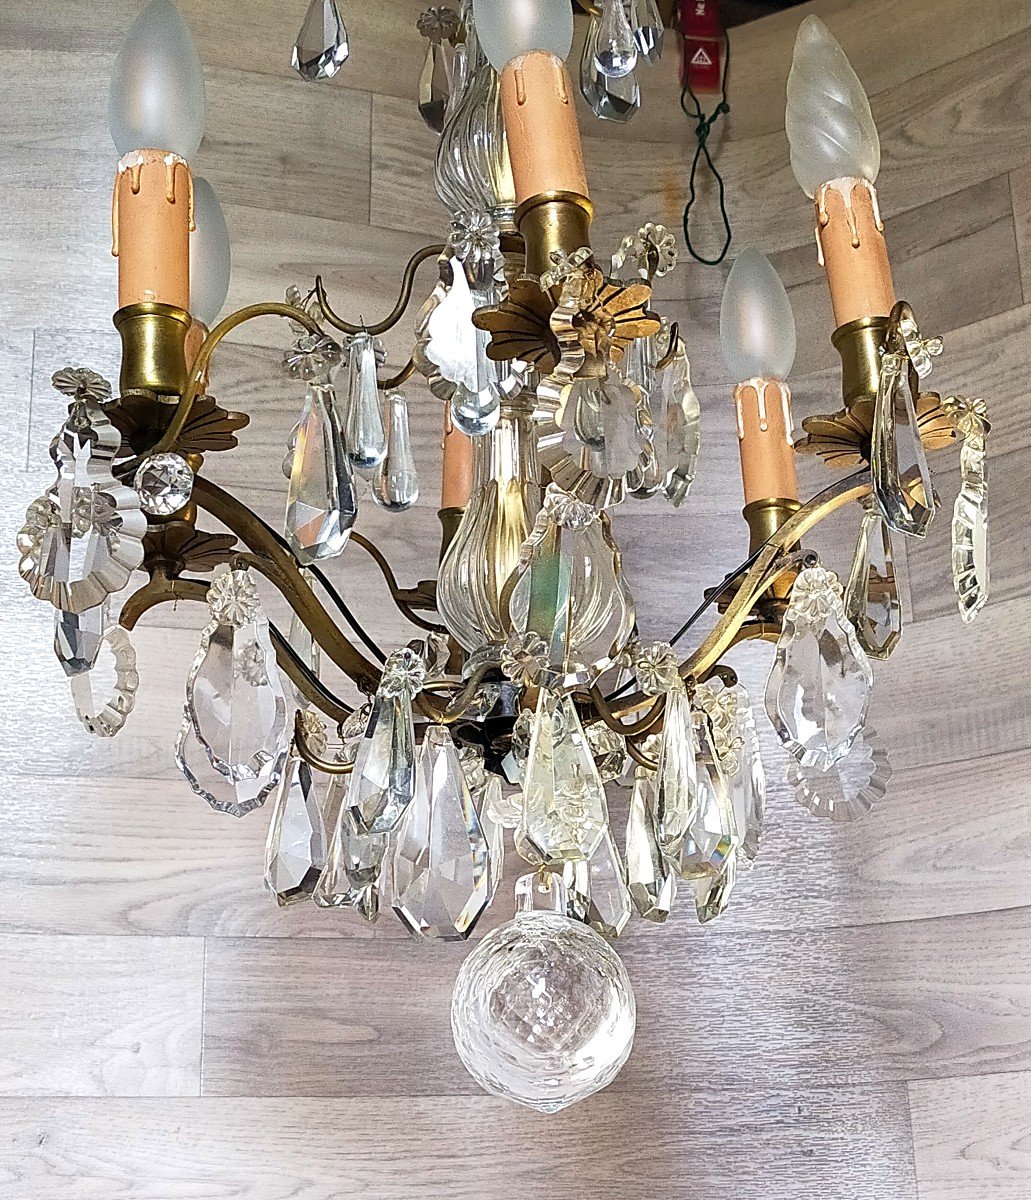 Chandelier With Tassels And Bronze -photo-2